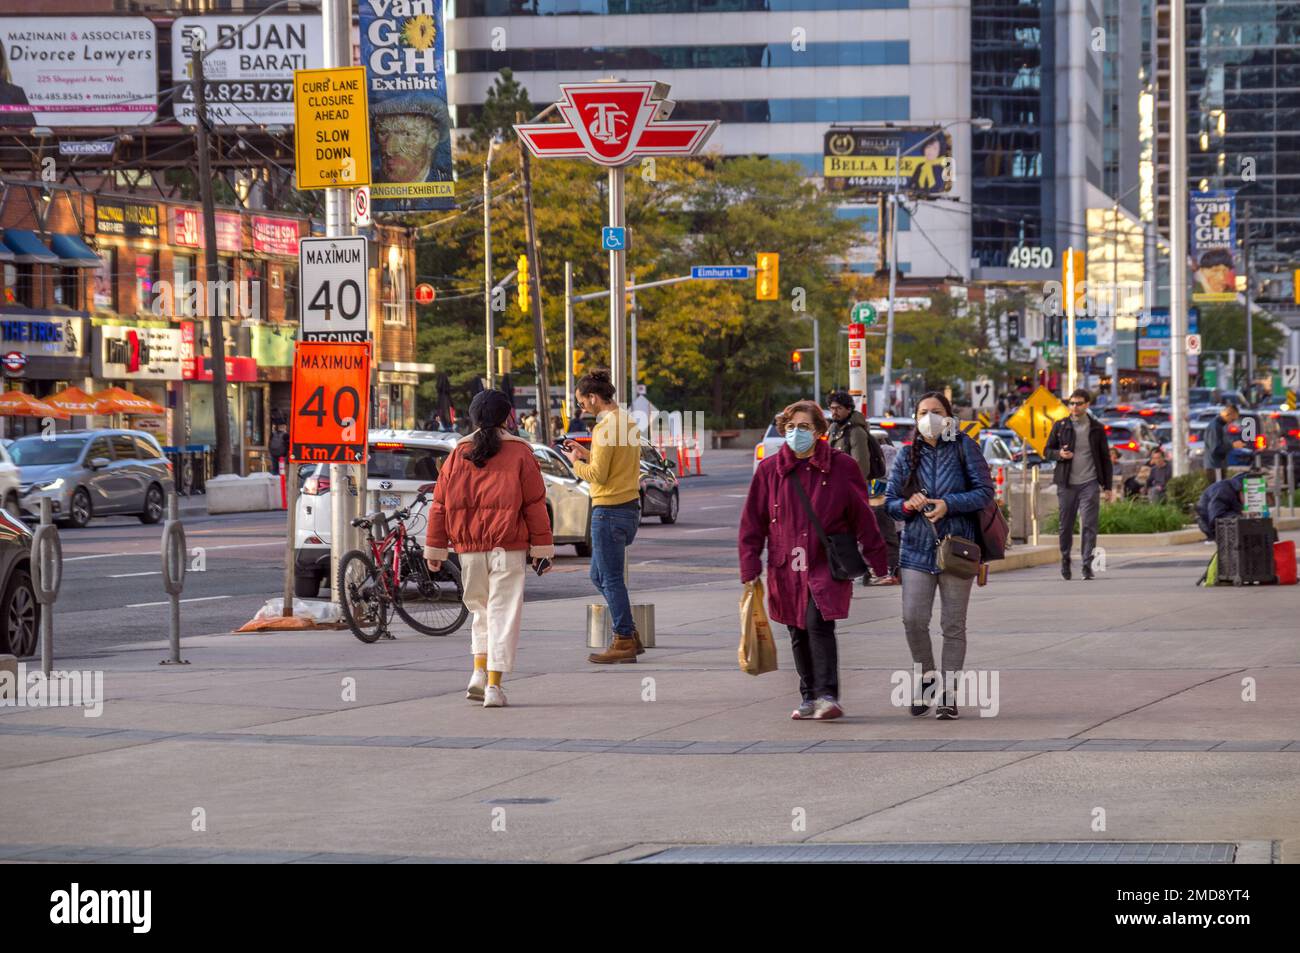 Toronto, Ontario, Canada - 10 03 2022: Summer view along Younge Street in North York neighborhood of Toronto city with Torontonians walking in front Stock Photo